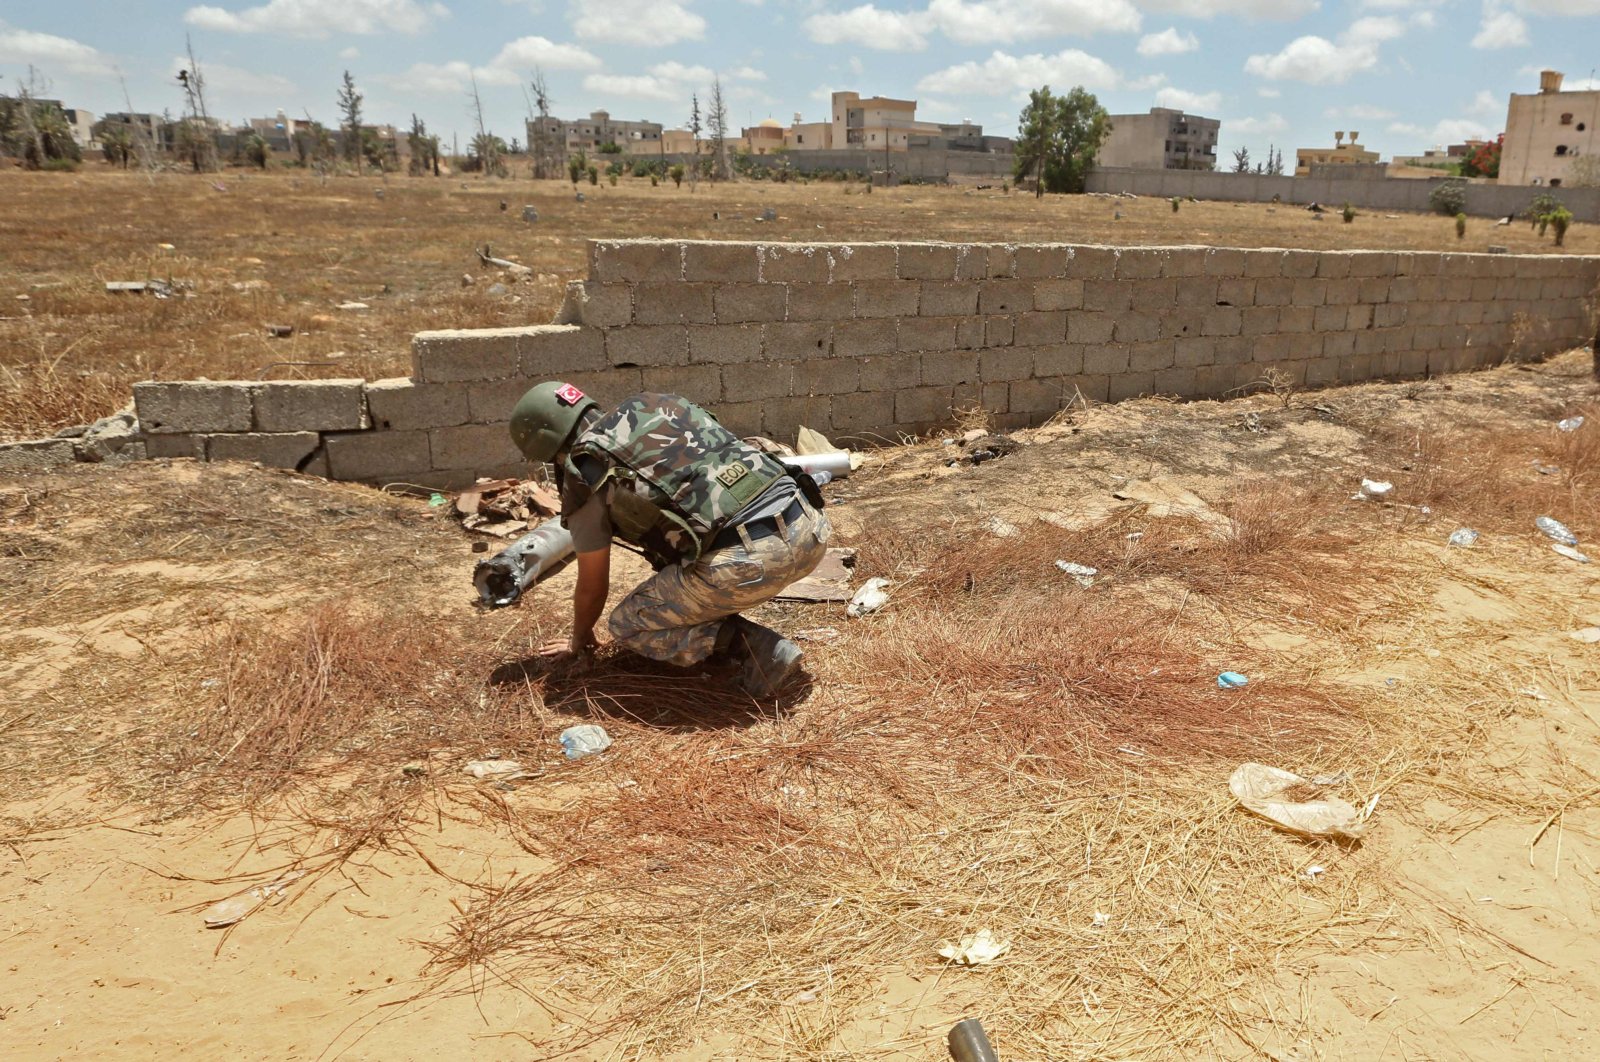 A Turkish de-miner takes part in the clearance of unexploded ordnance in the area of Salah al-Din, south of the Libyan capital Tripoli, June 15, 2020. (AFP Photo)